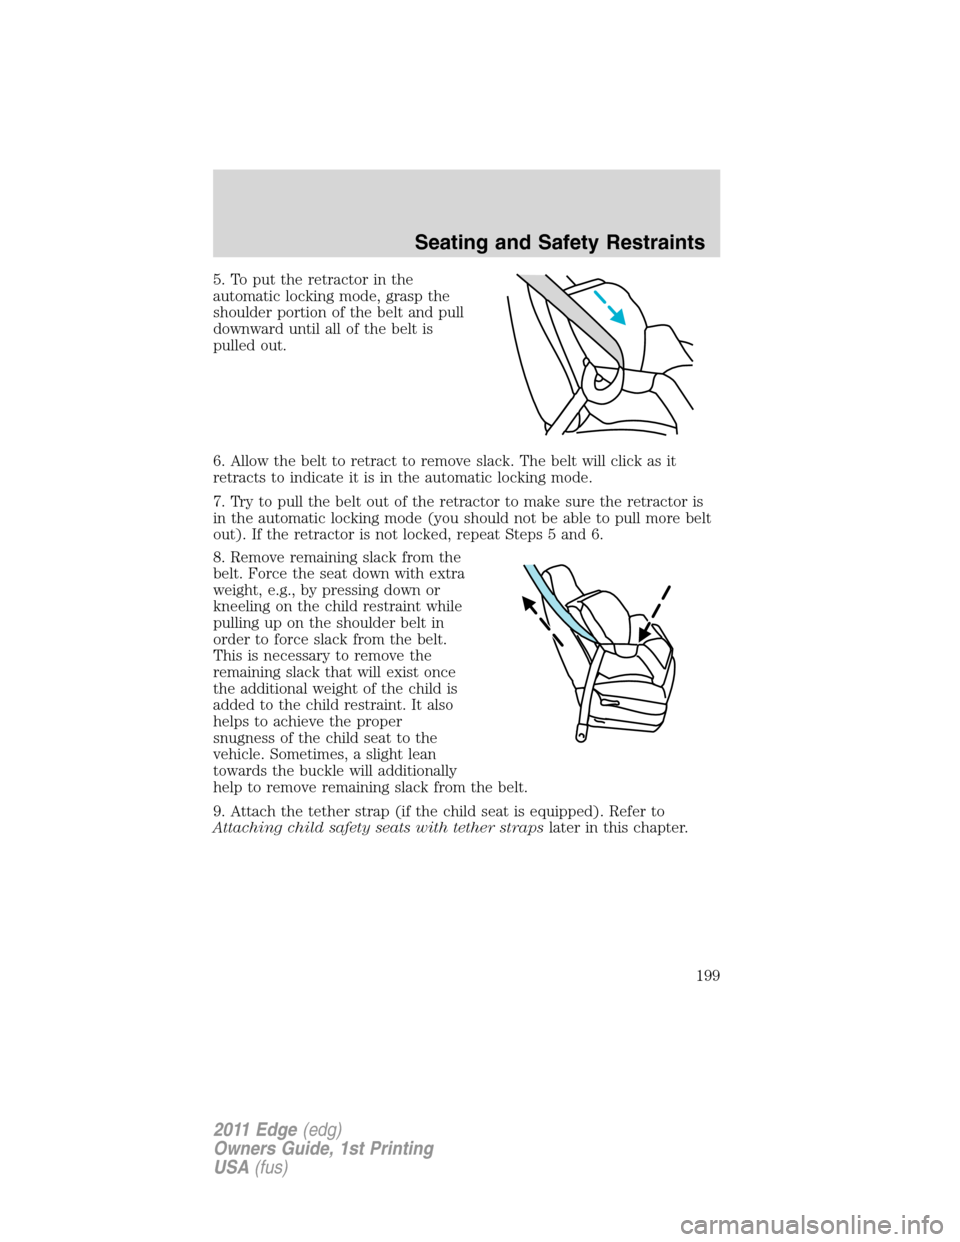 FORD EDGE 2011 1.G Owners Manual 5. To put the retractor in the
automatic locking mode, grasp the
shoulder portion of the belt and pull
downward until all of the belt is
pulled out.
6. Allow the belt to retract to remove slack. The b